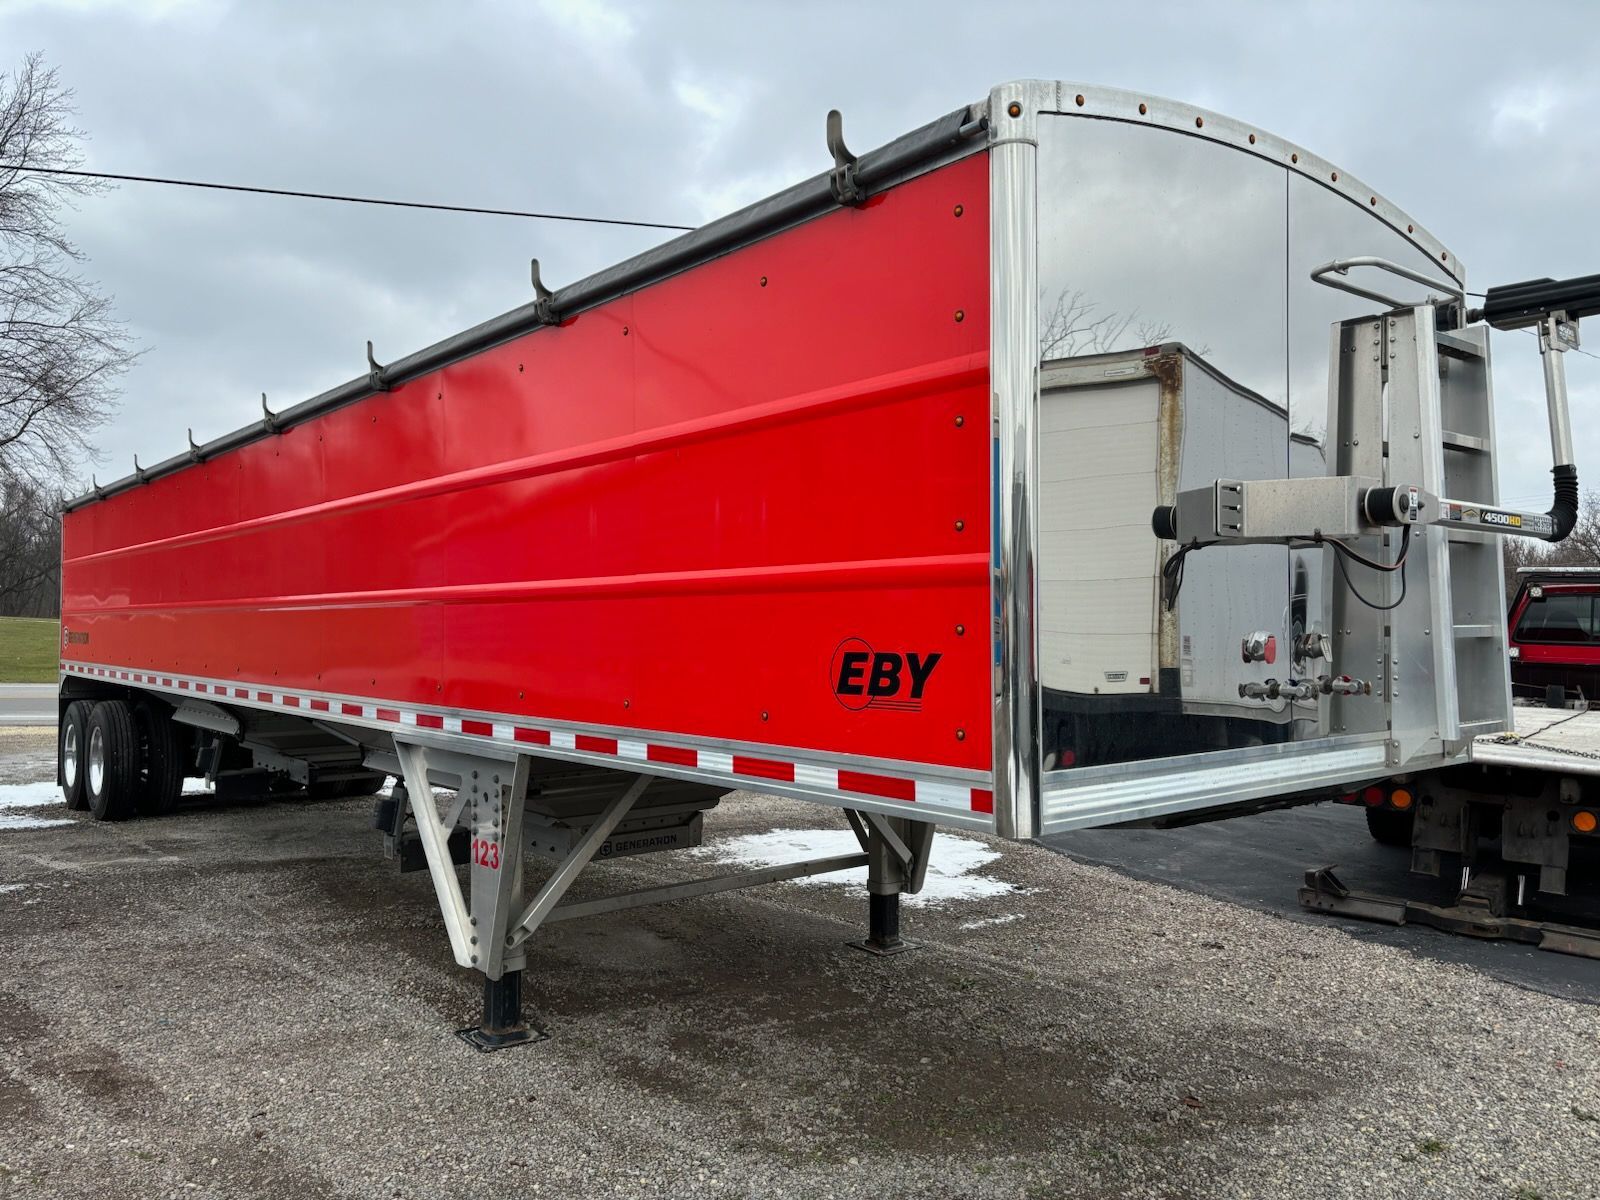 2021 Generation Eby Trailer, ag-hoppers, cameras in hoppers